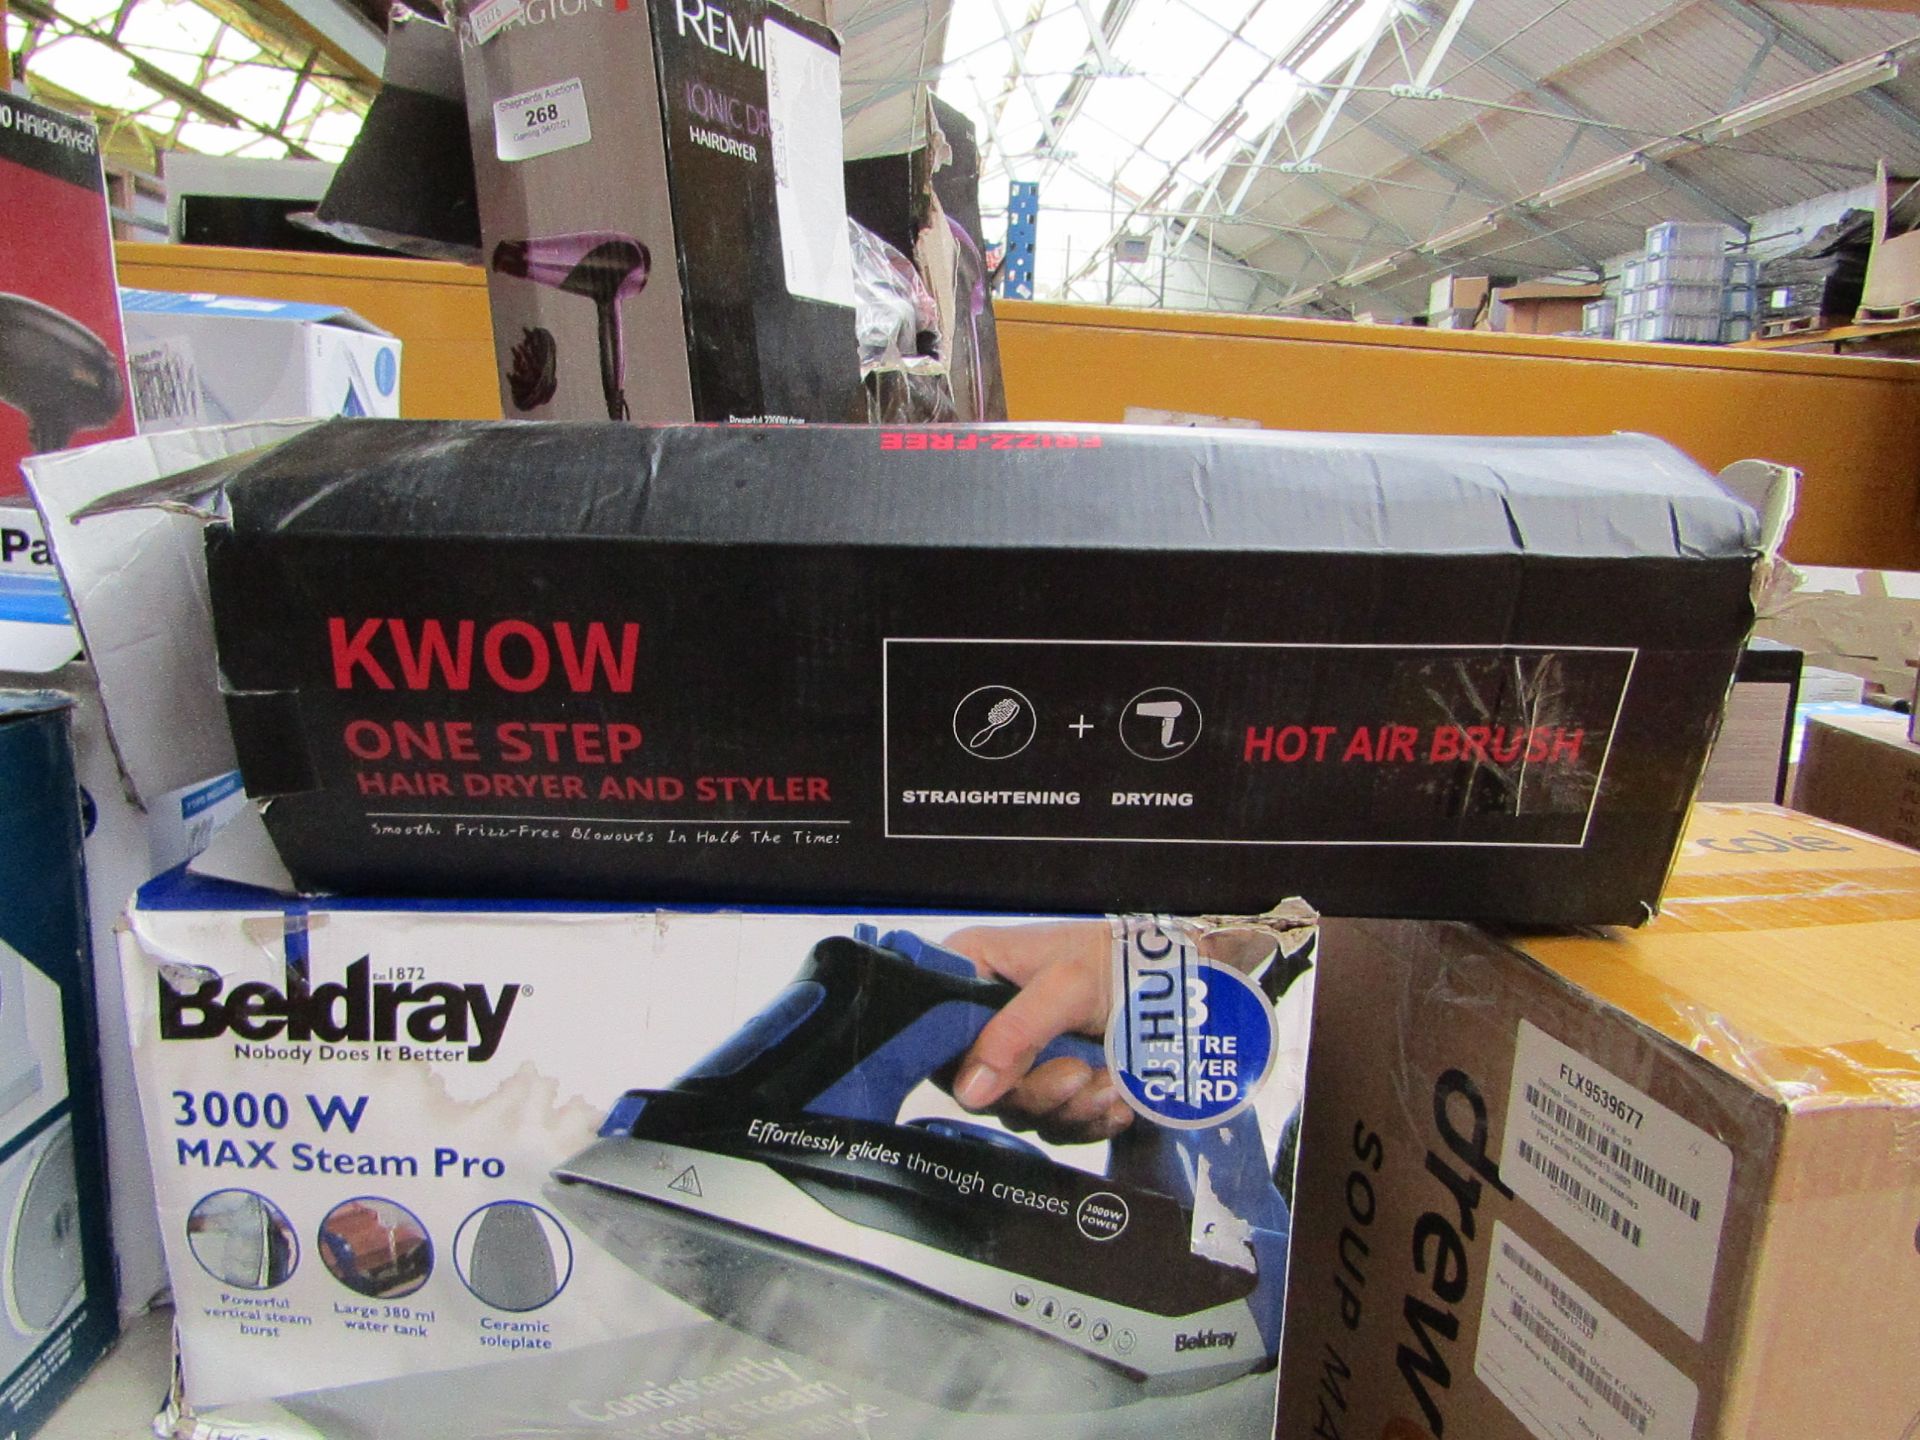 Kwow - One Step Hair Dryer & Styler ( Straightening & Drying ) - Vendor Suggests This Lot Has Been